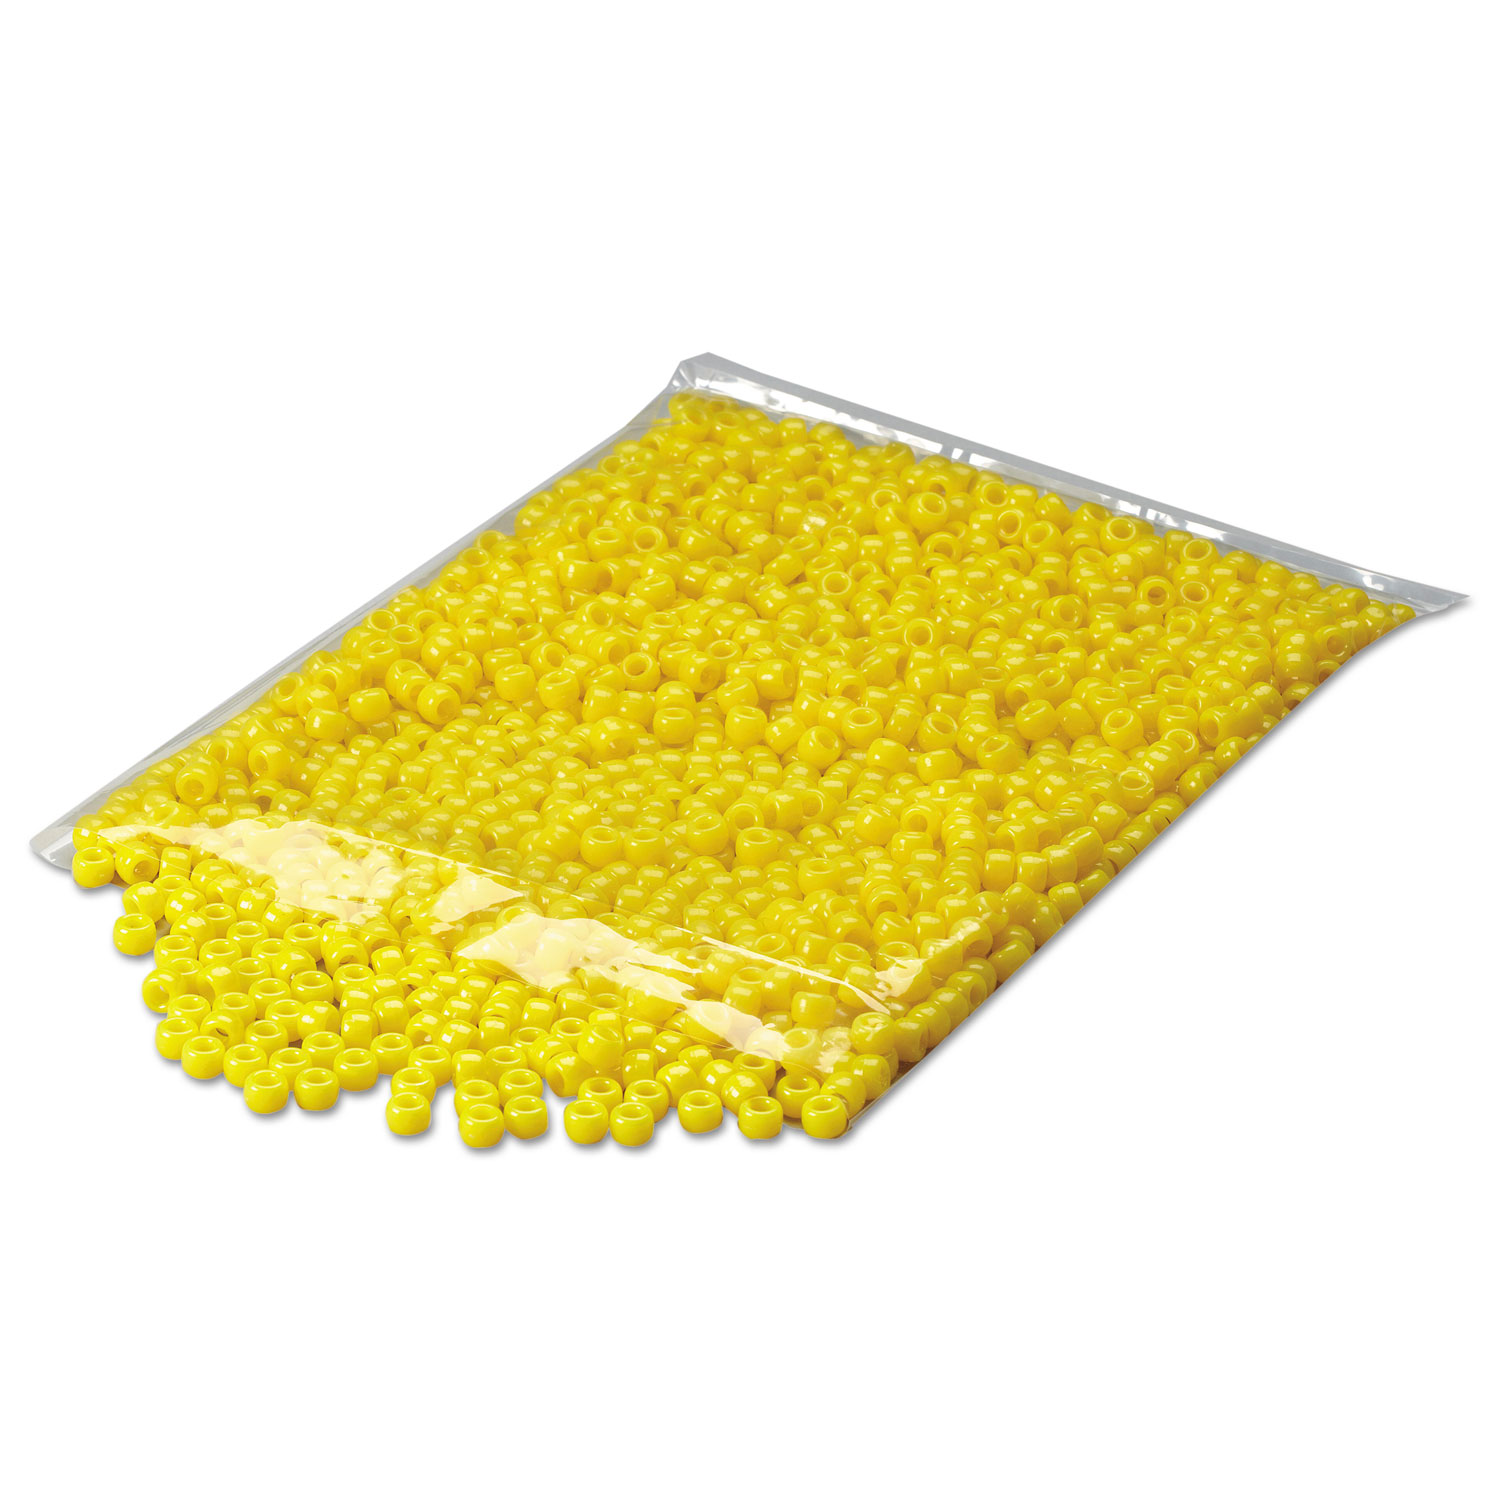 Low-Density Flat Poly Bags, 3 x 5, 2 Mil, Clear, 5000/Carton